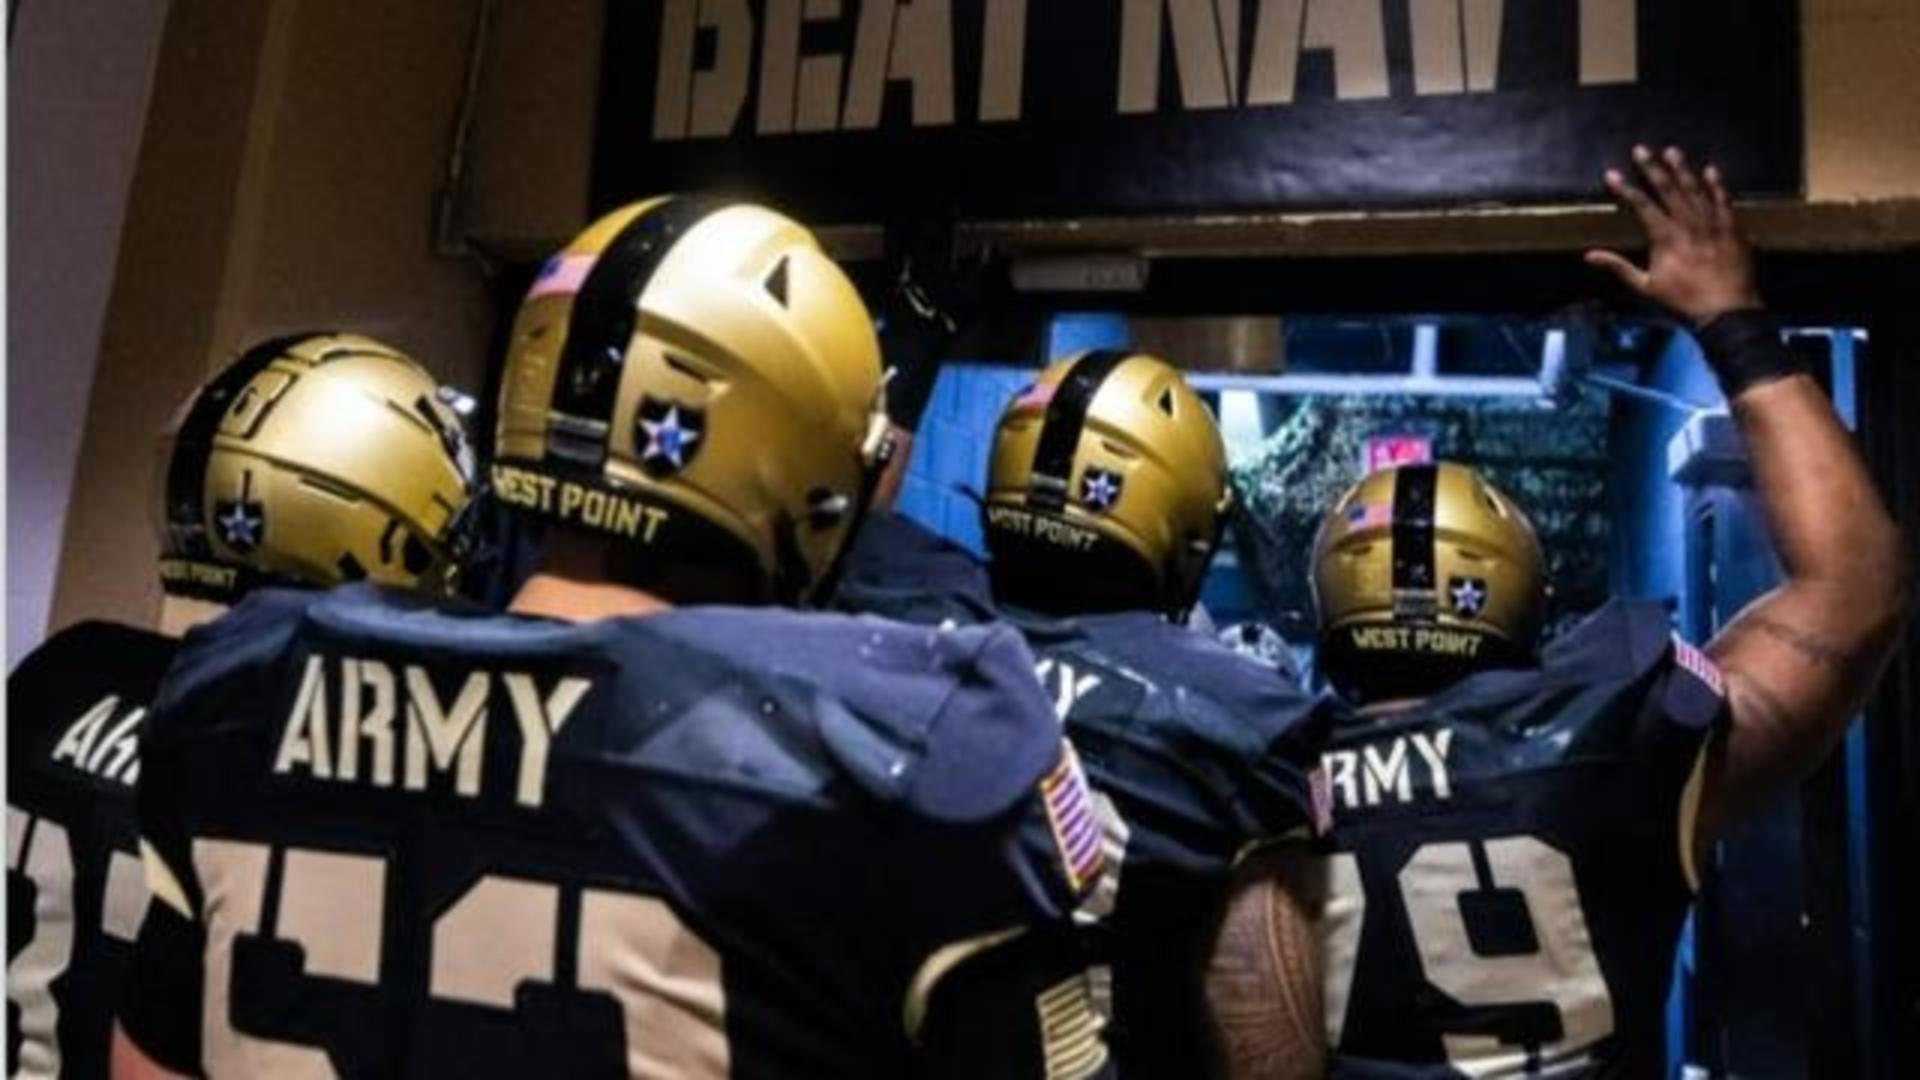 Army and Navy set to square off in 123rd annual rivalry game - CBS News